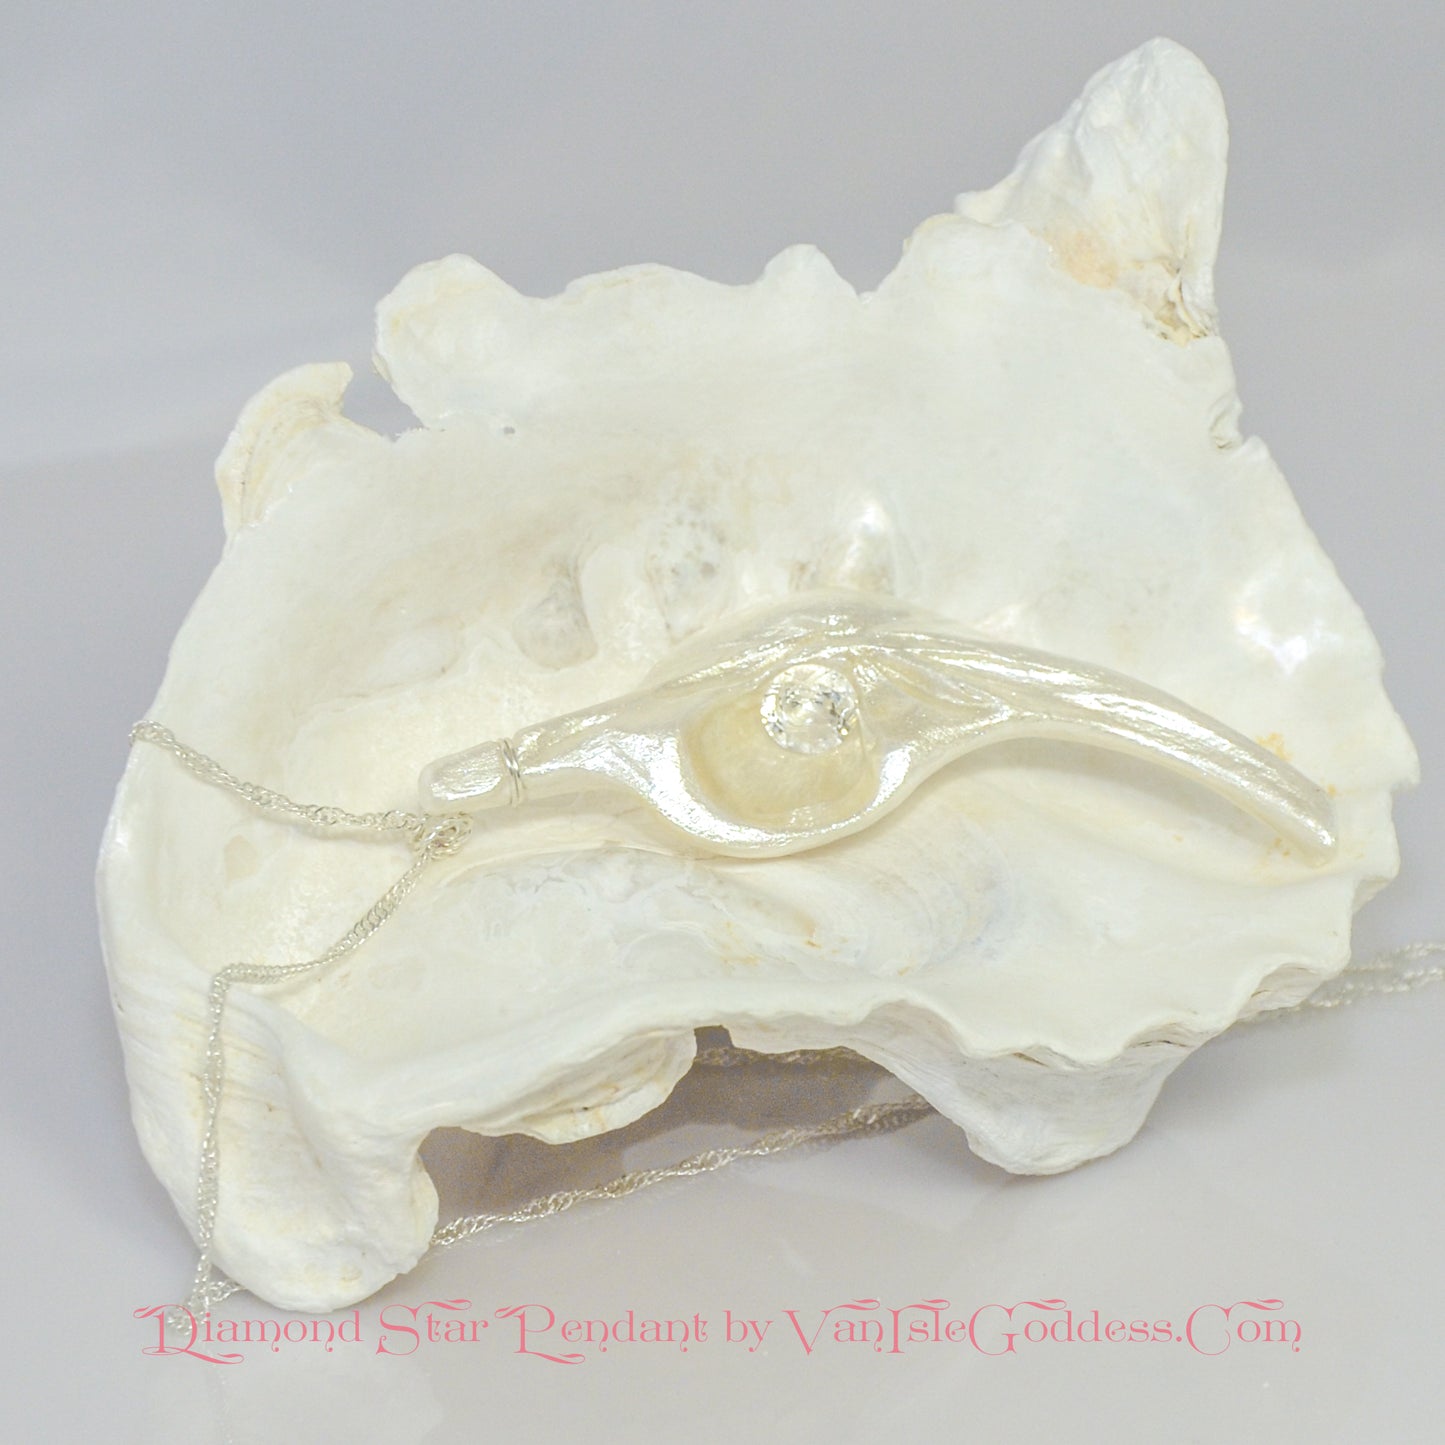 Diamond Star natural seashell pendant with eight mm faceted herkimer diamond. The pendant is laying in seashell.  The print on the bottom of the image says:  Diamond Star Pendant by van isle goddess dot com